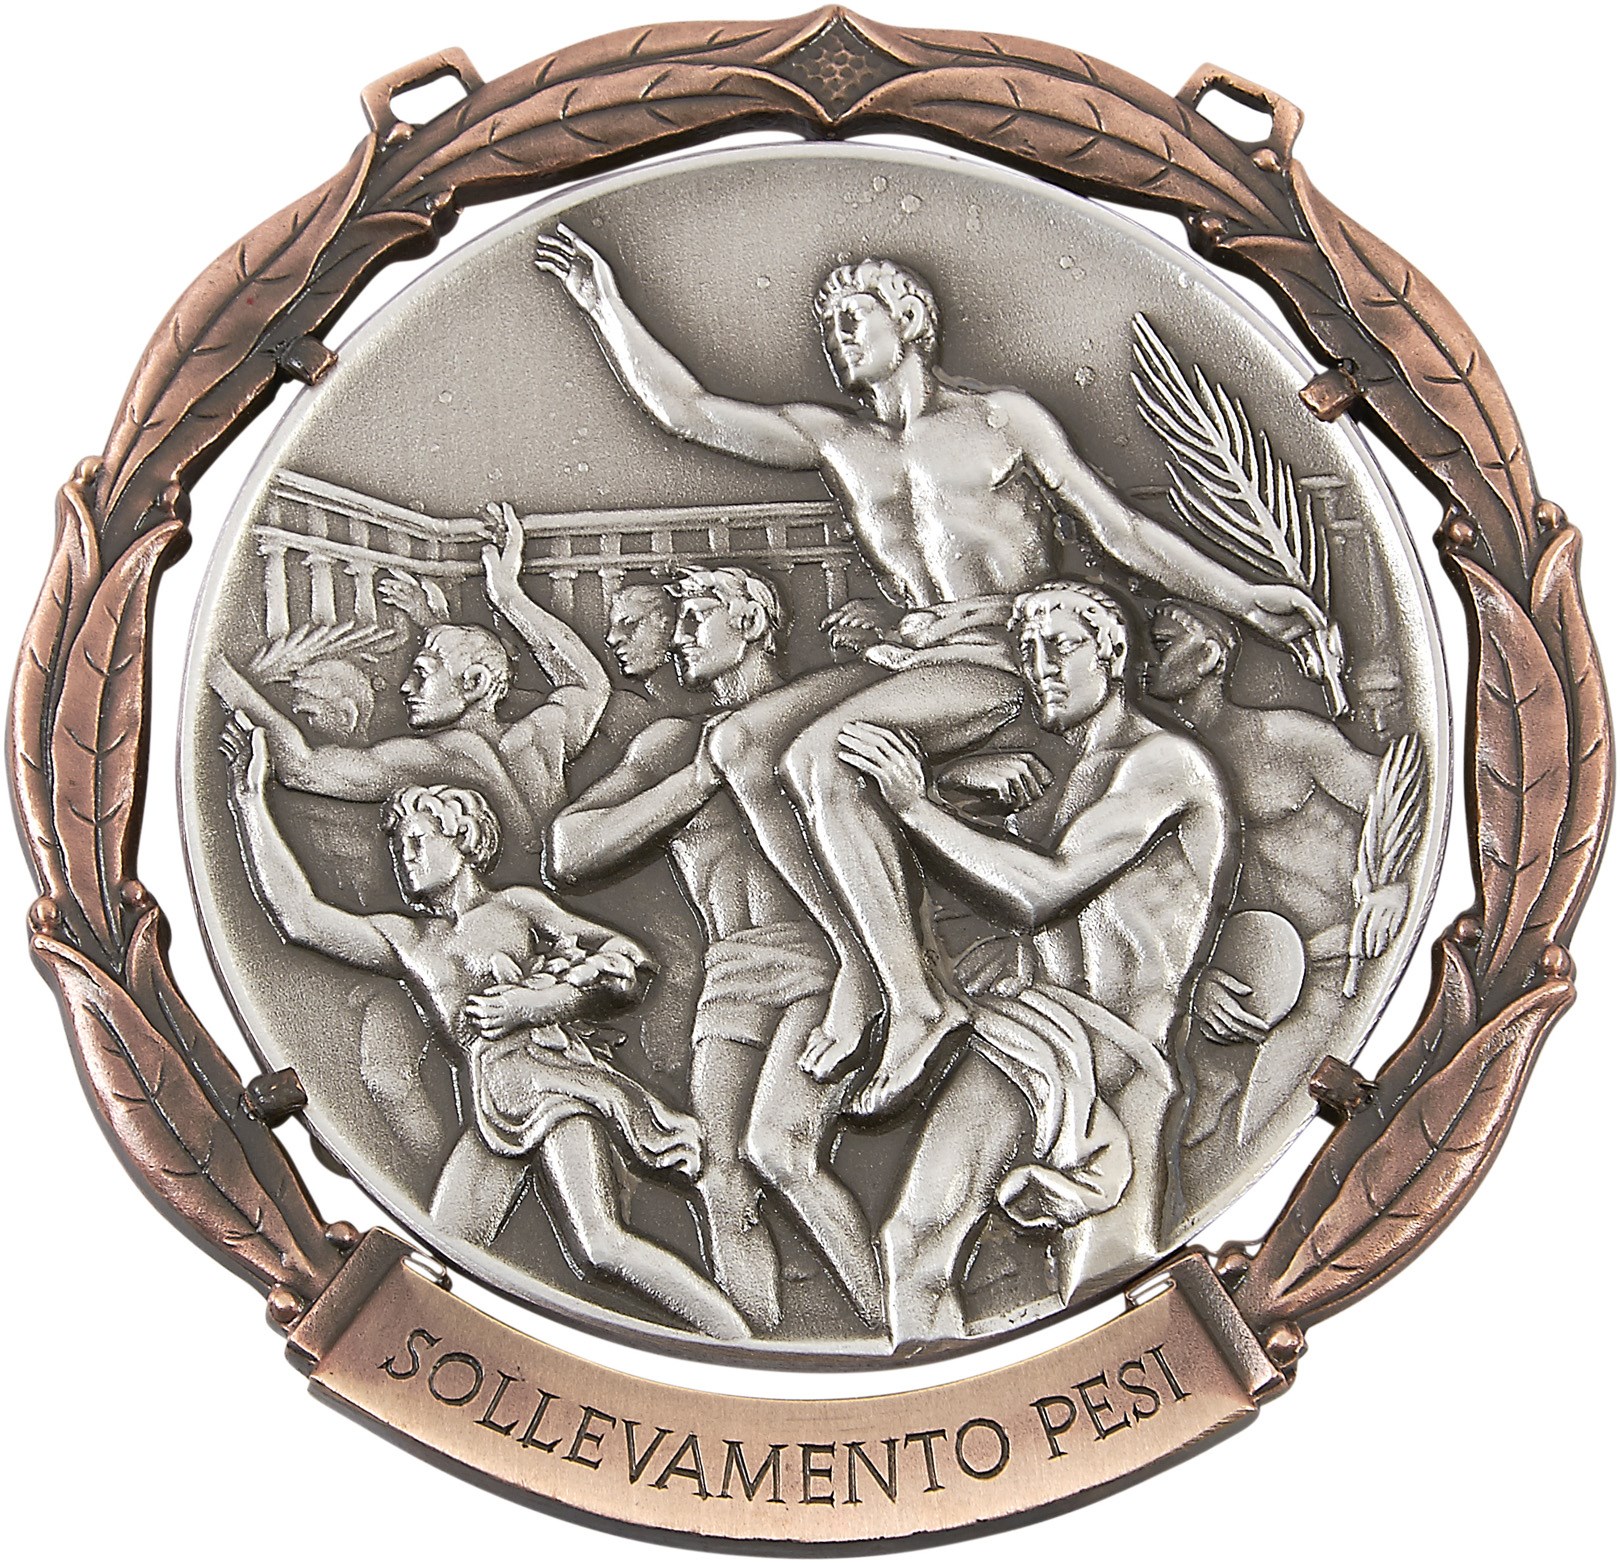 Olympics and All Sports - 1960 Rome Olympics Weightlifting Silver Medal Awarded to "World's Strongest Man"